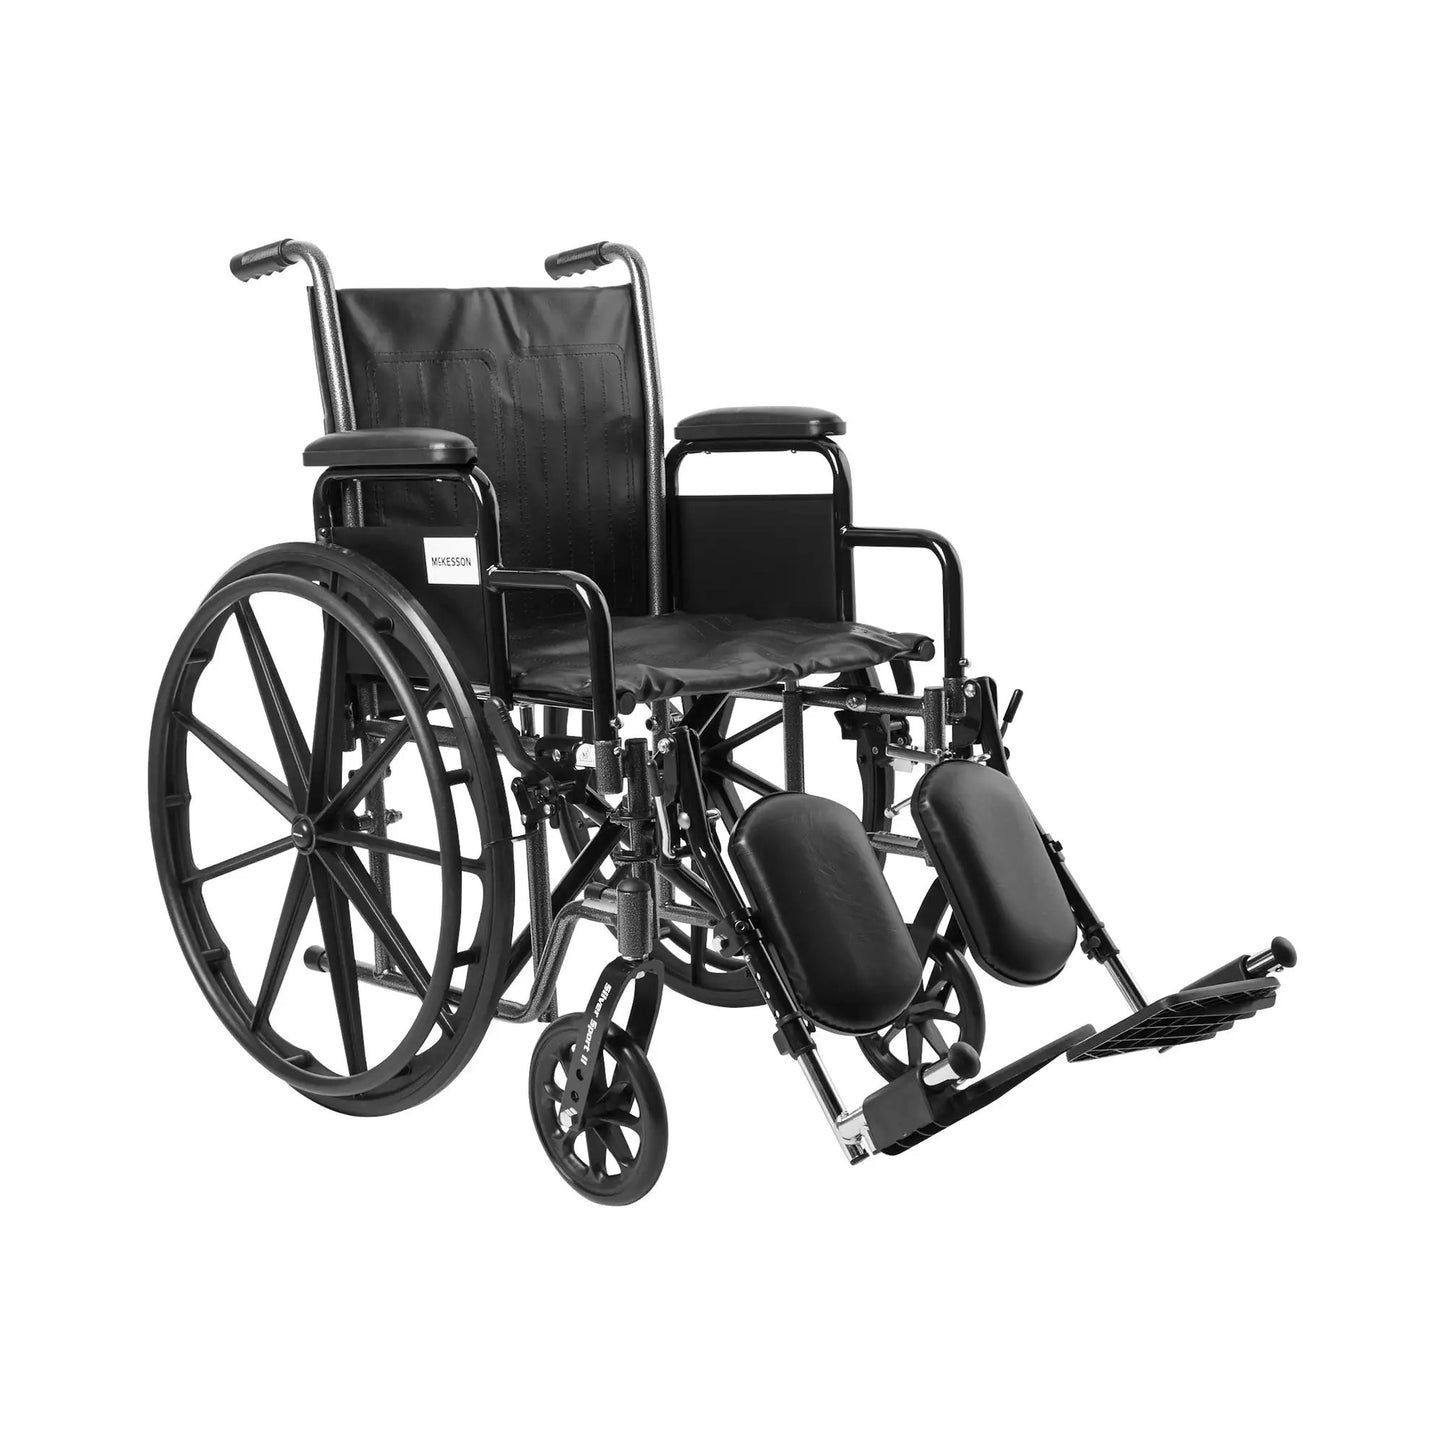 McKesson Standard Wheelchair with Padded, Removable Arm, Composite Mag Wheel, 18 in. Seat, Swing-Away Elevating Footrest, 300 lbs.